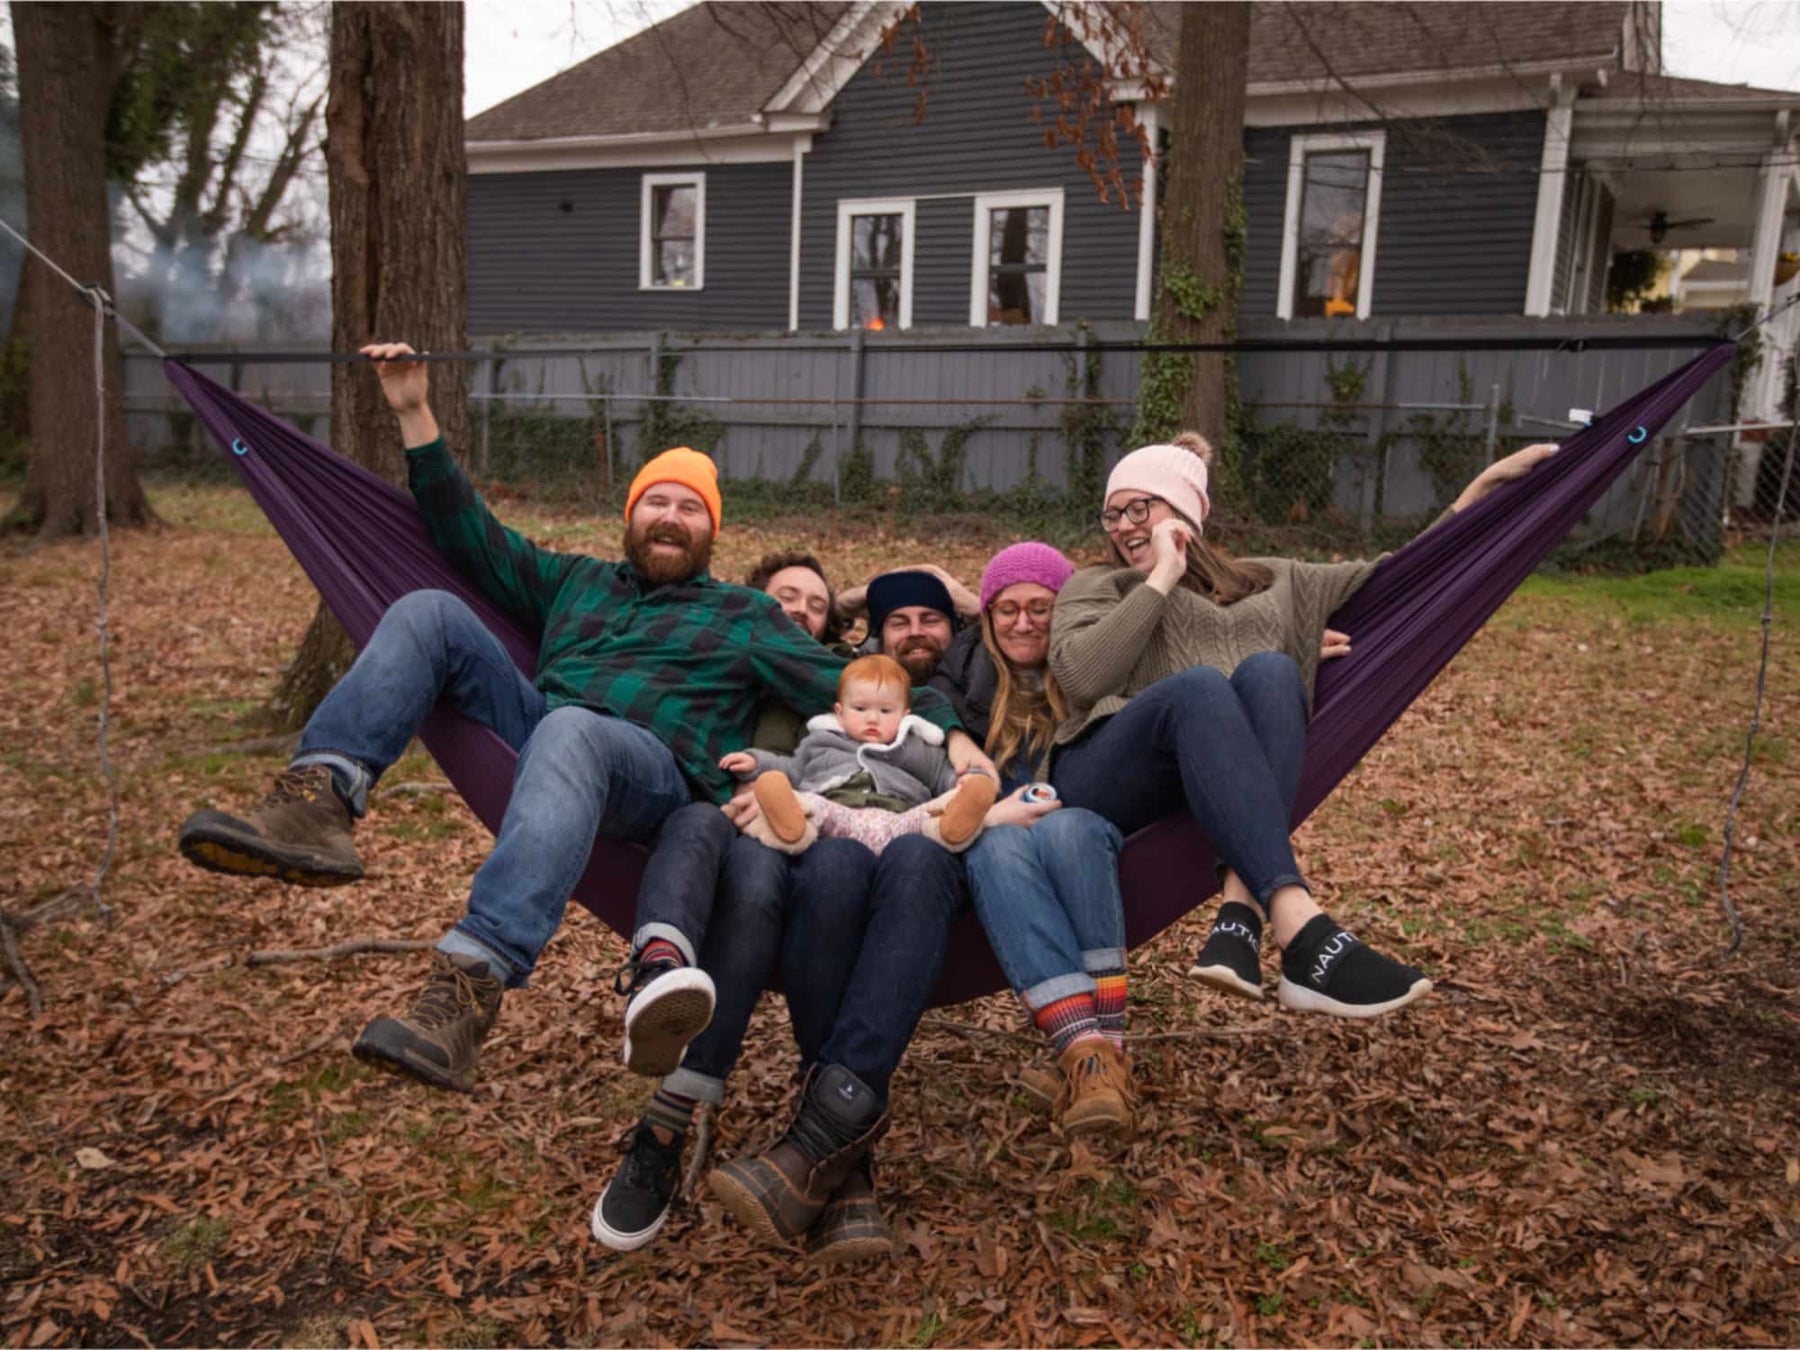 *SPECIAL OFFER | Pares | Spaciously Comfy Camping Hammock Weighs 15oz Hammock